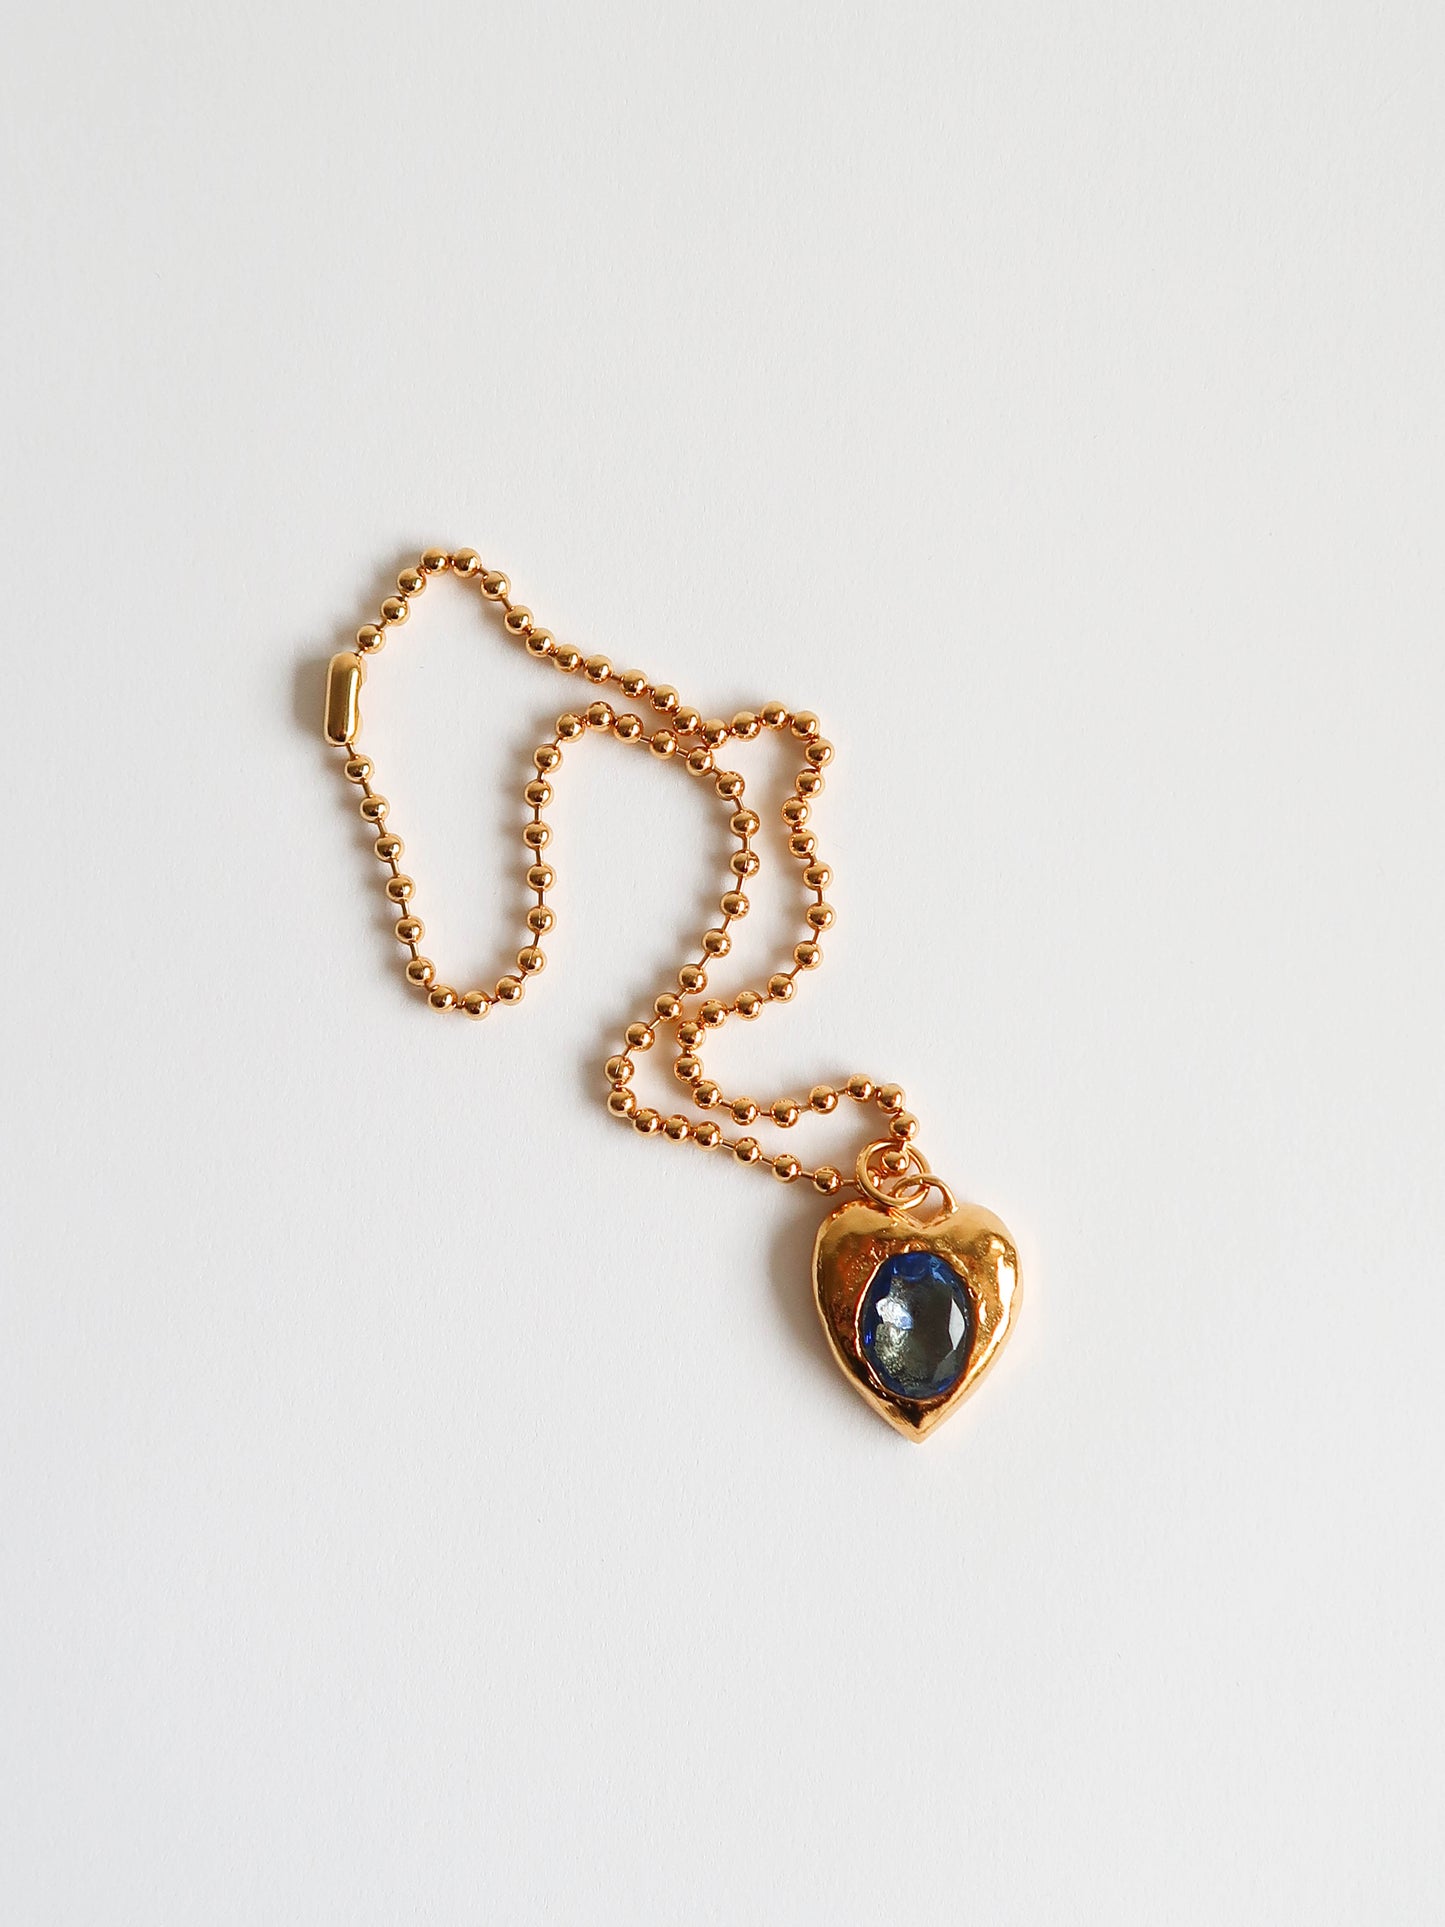 Pacha Necklace - Gold / Blue